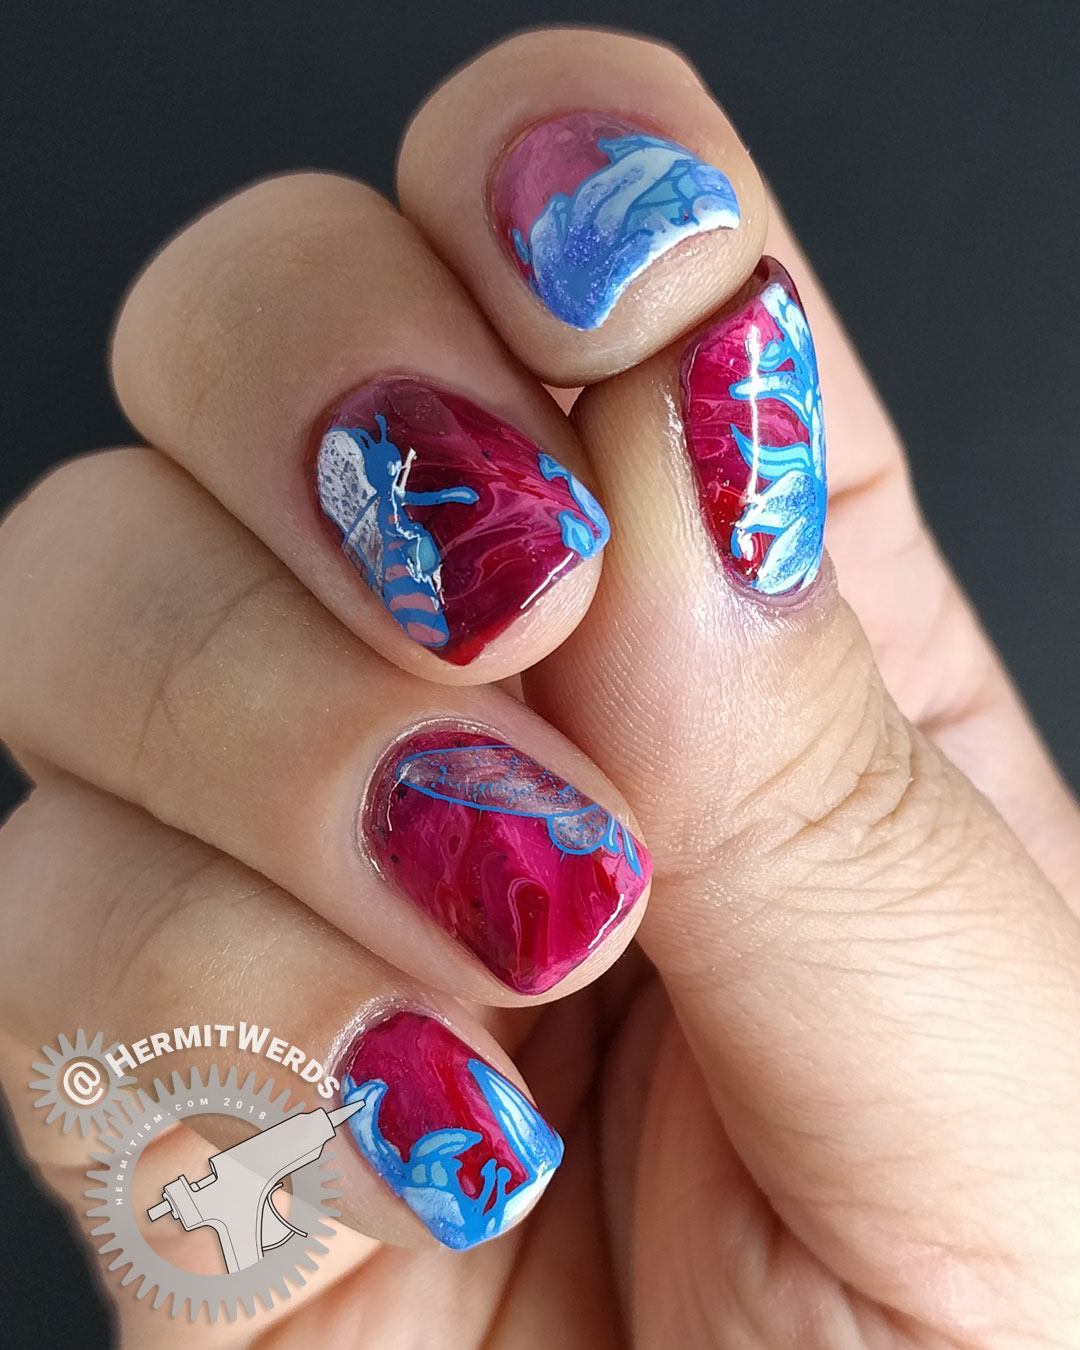 Lady of the Bees 2.0 - Hermit Werds - blue bee fairy stamping decal and lilies on a red to pink fluid art base.